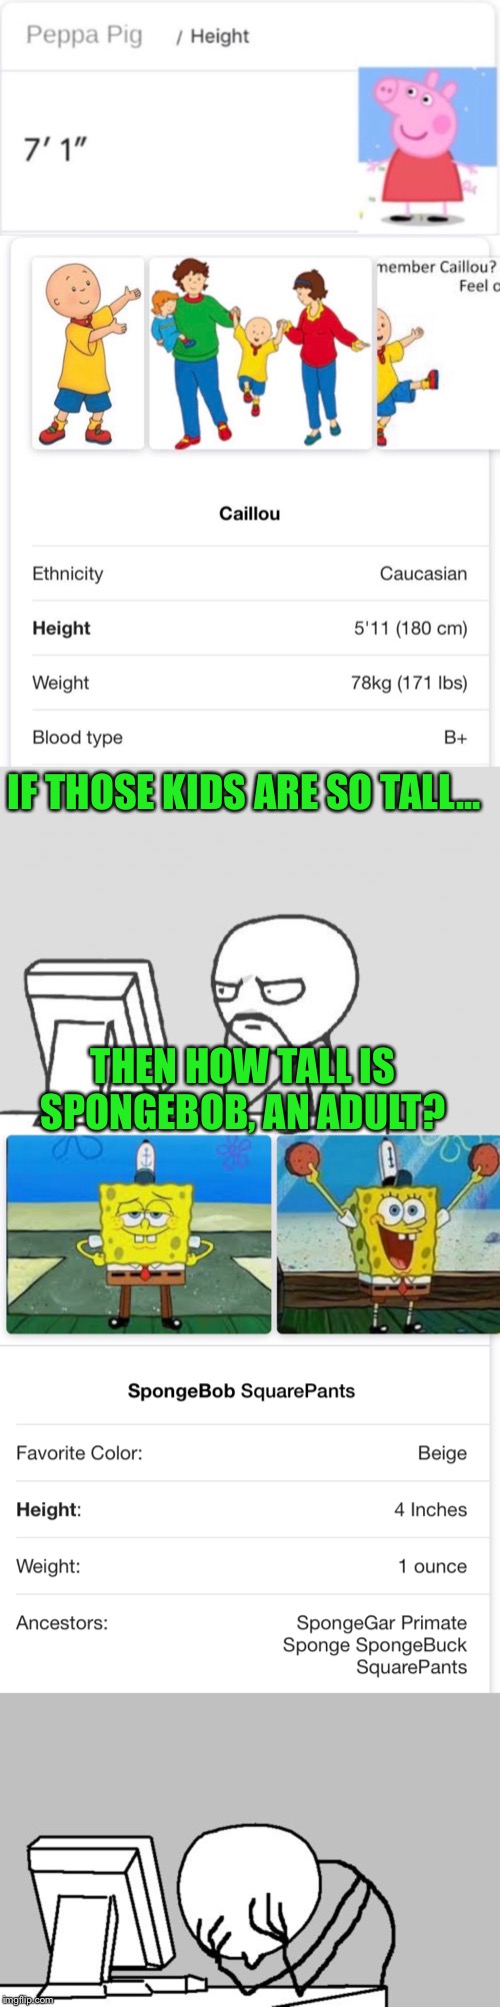 Oh Neptune... |  IF THOSE KIDS ARE SO TALL... THEN HOW TALL IS SPONGEBOB, AN ADULT? | image tagged in memes,computer guy,spongebob,peppa pig,caillou,funny | made w/ Imgflip meme maker